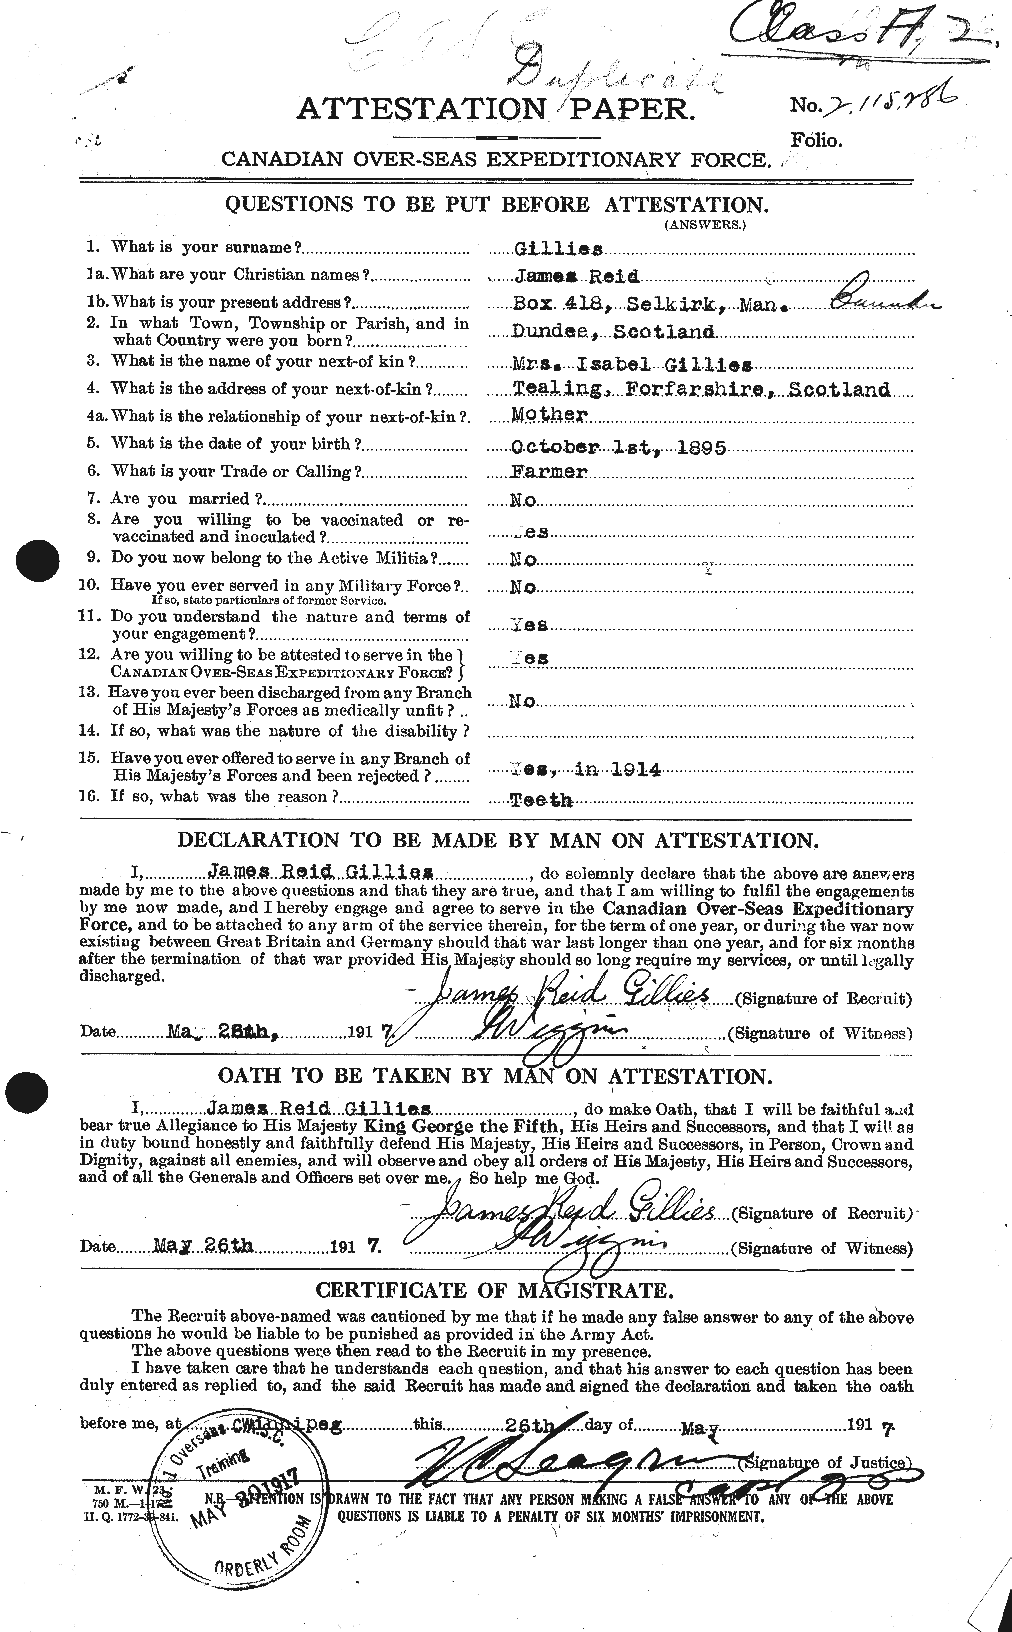 Personnel Records of the First World War - CEF 350534a